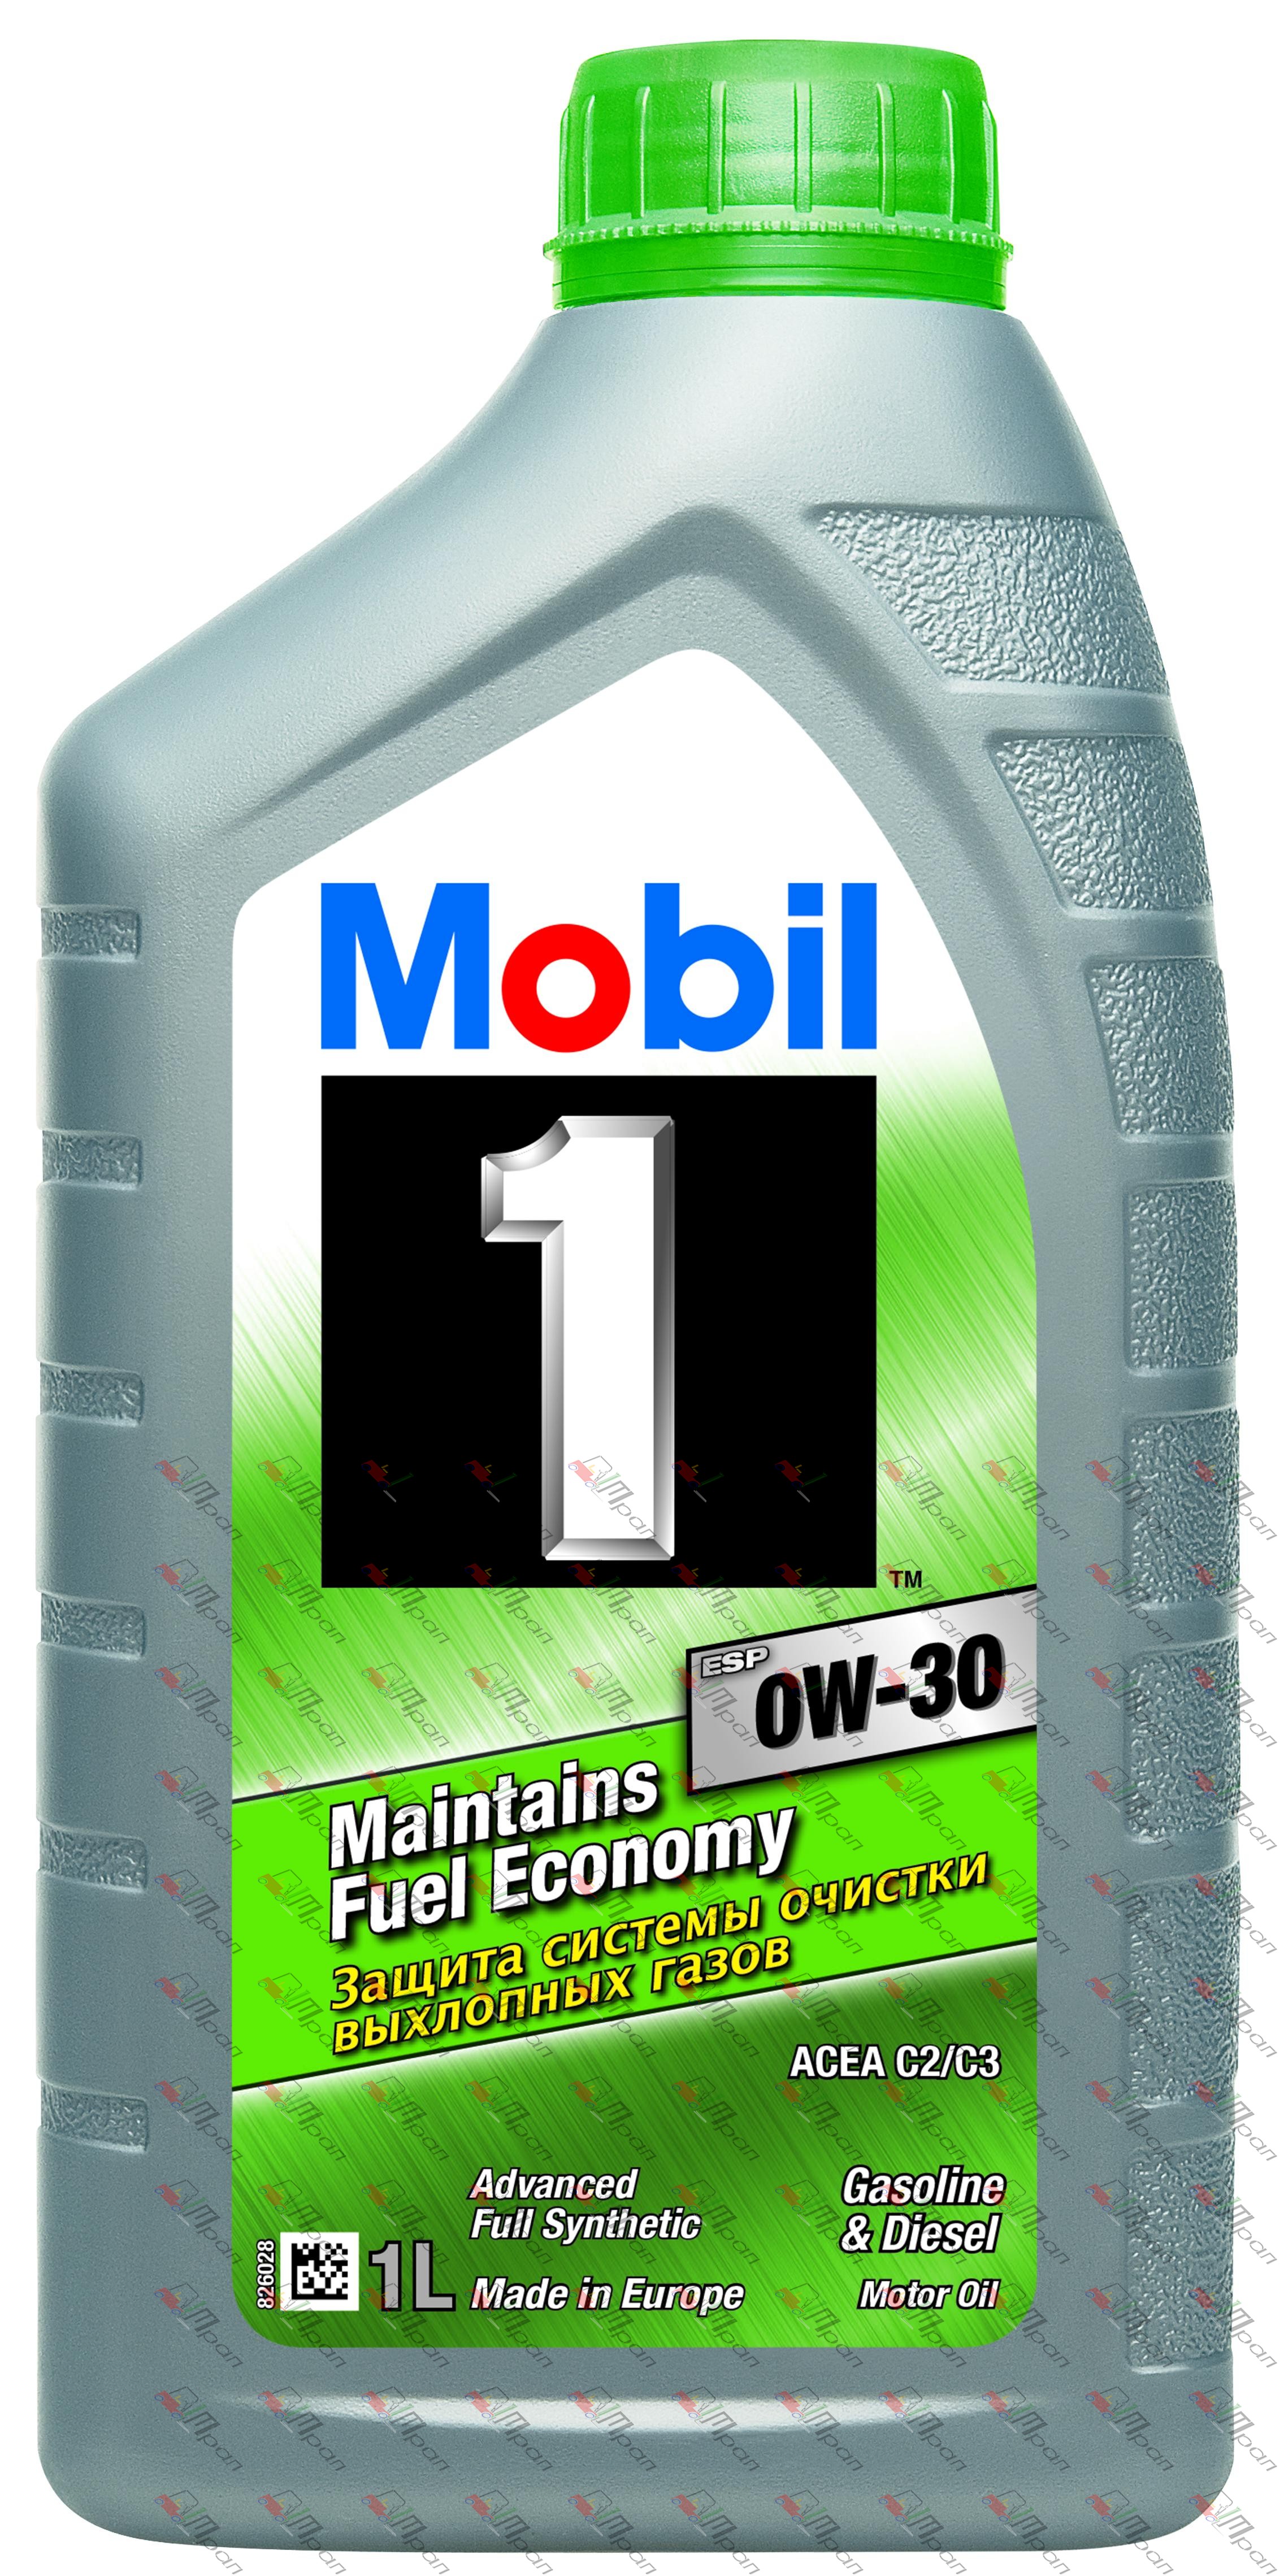 Mobil Масло моторное синтетич. Mobil 1 ESP 0w30 1л